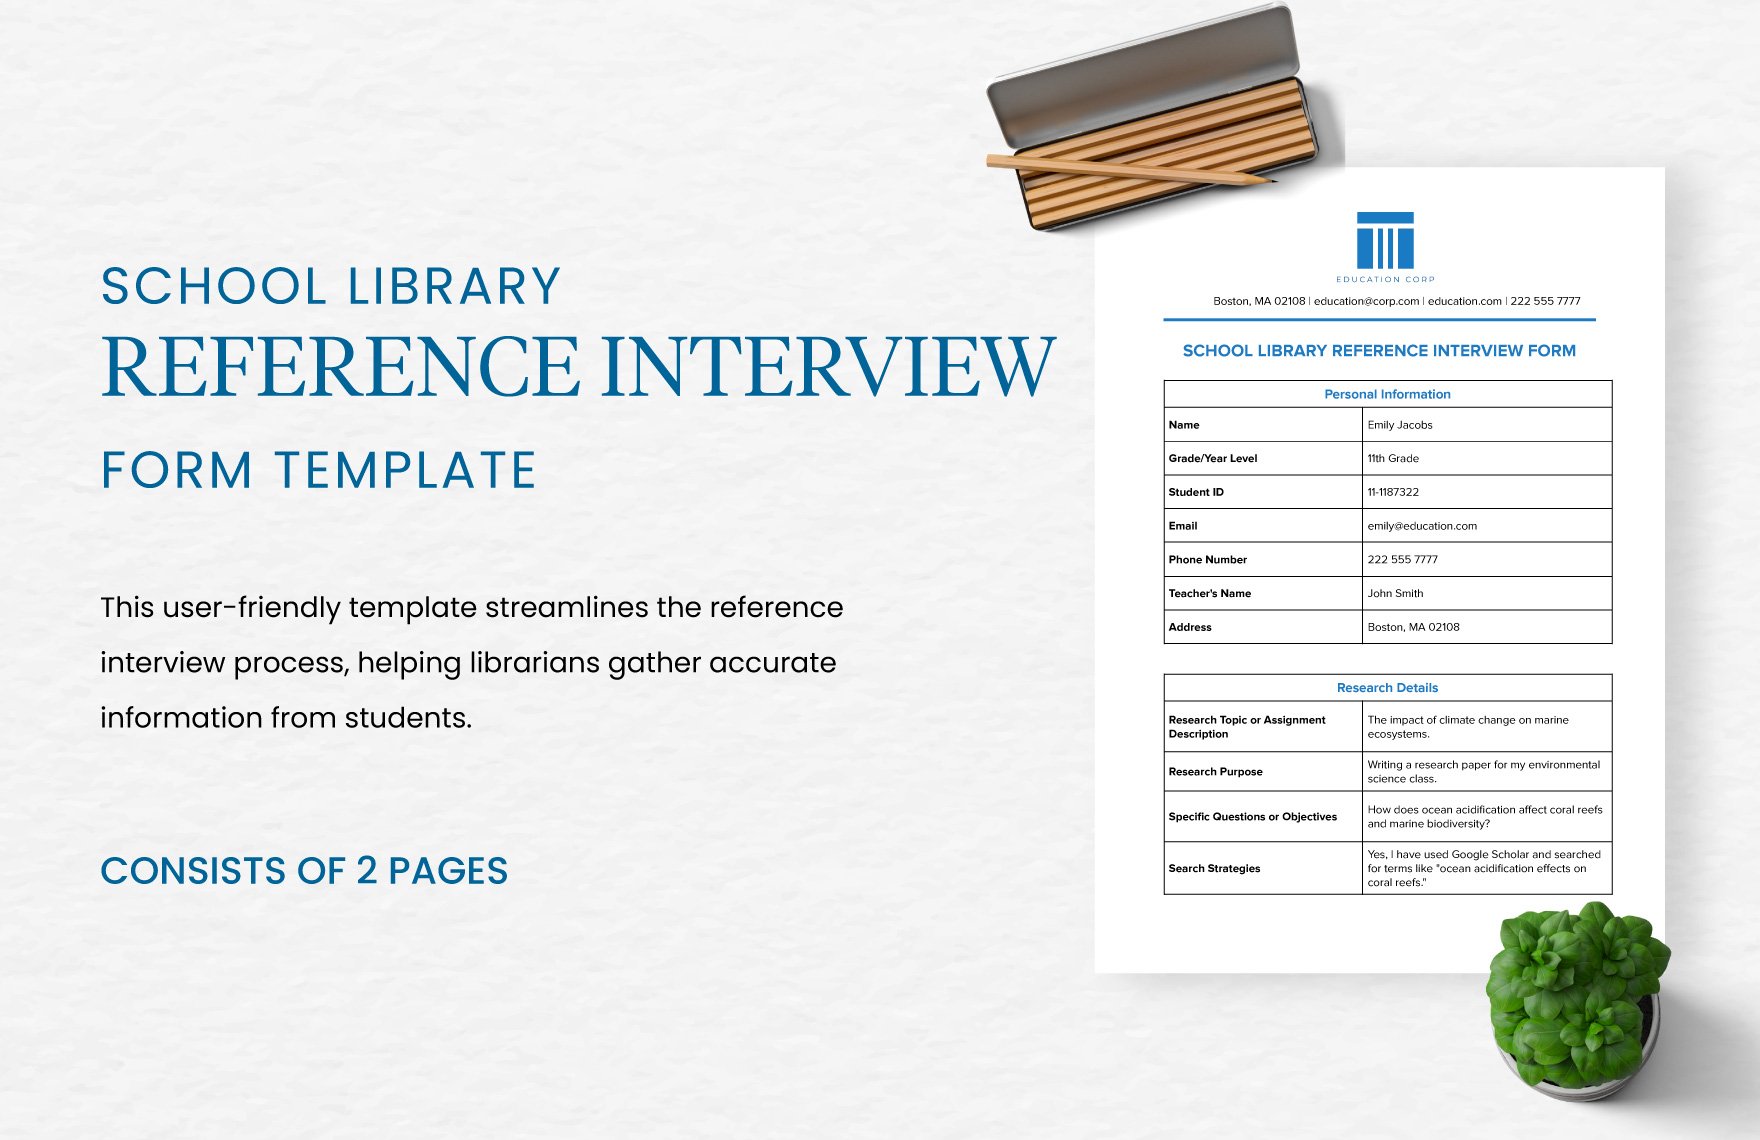 School Library Reference Interview Form Template